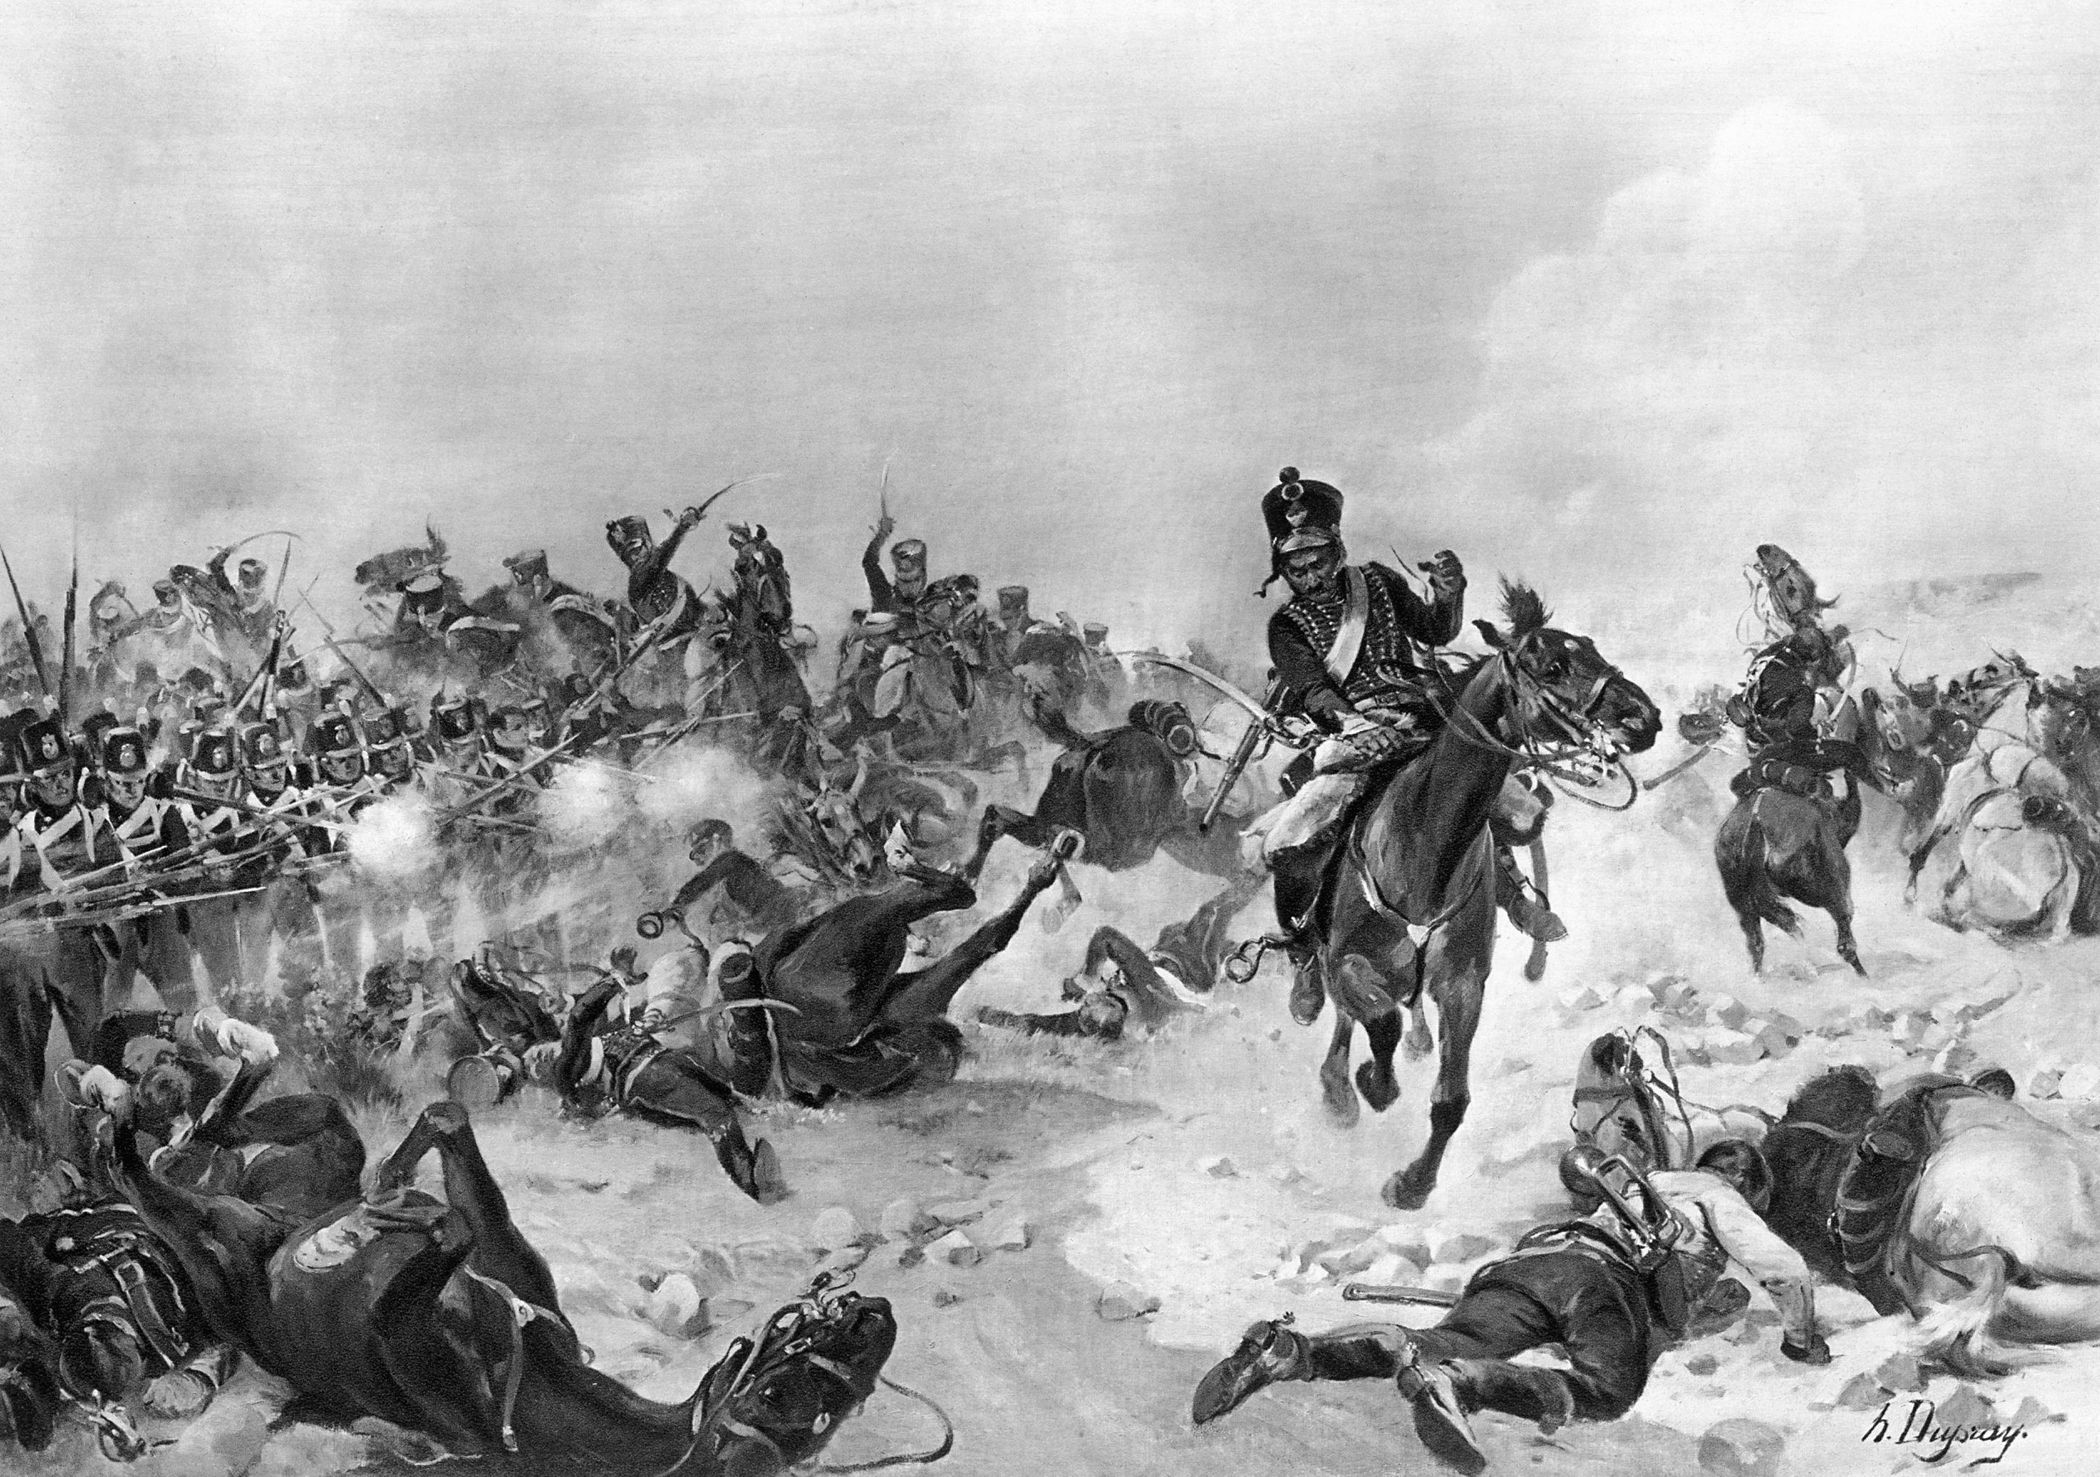 French cavalry attack the British infantry, which has formed into its well-known battle squares to deliver massed rifle volleys. 